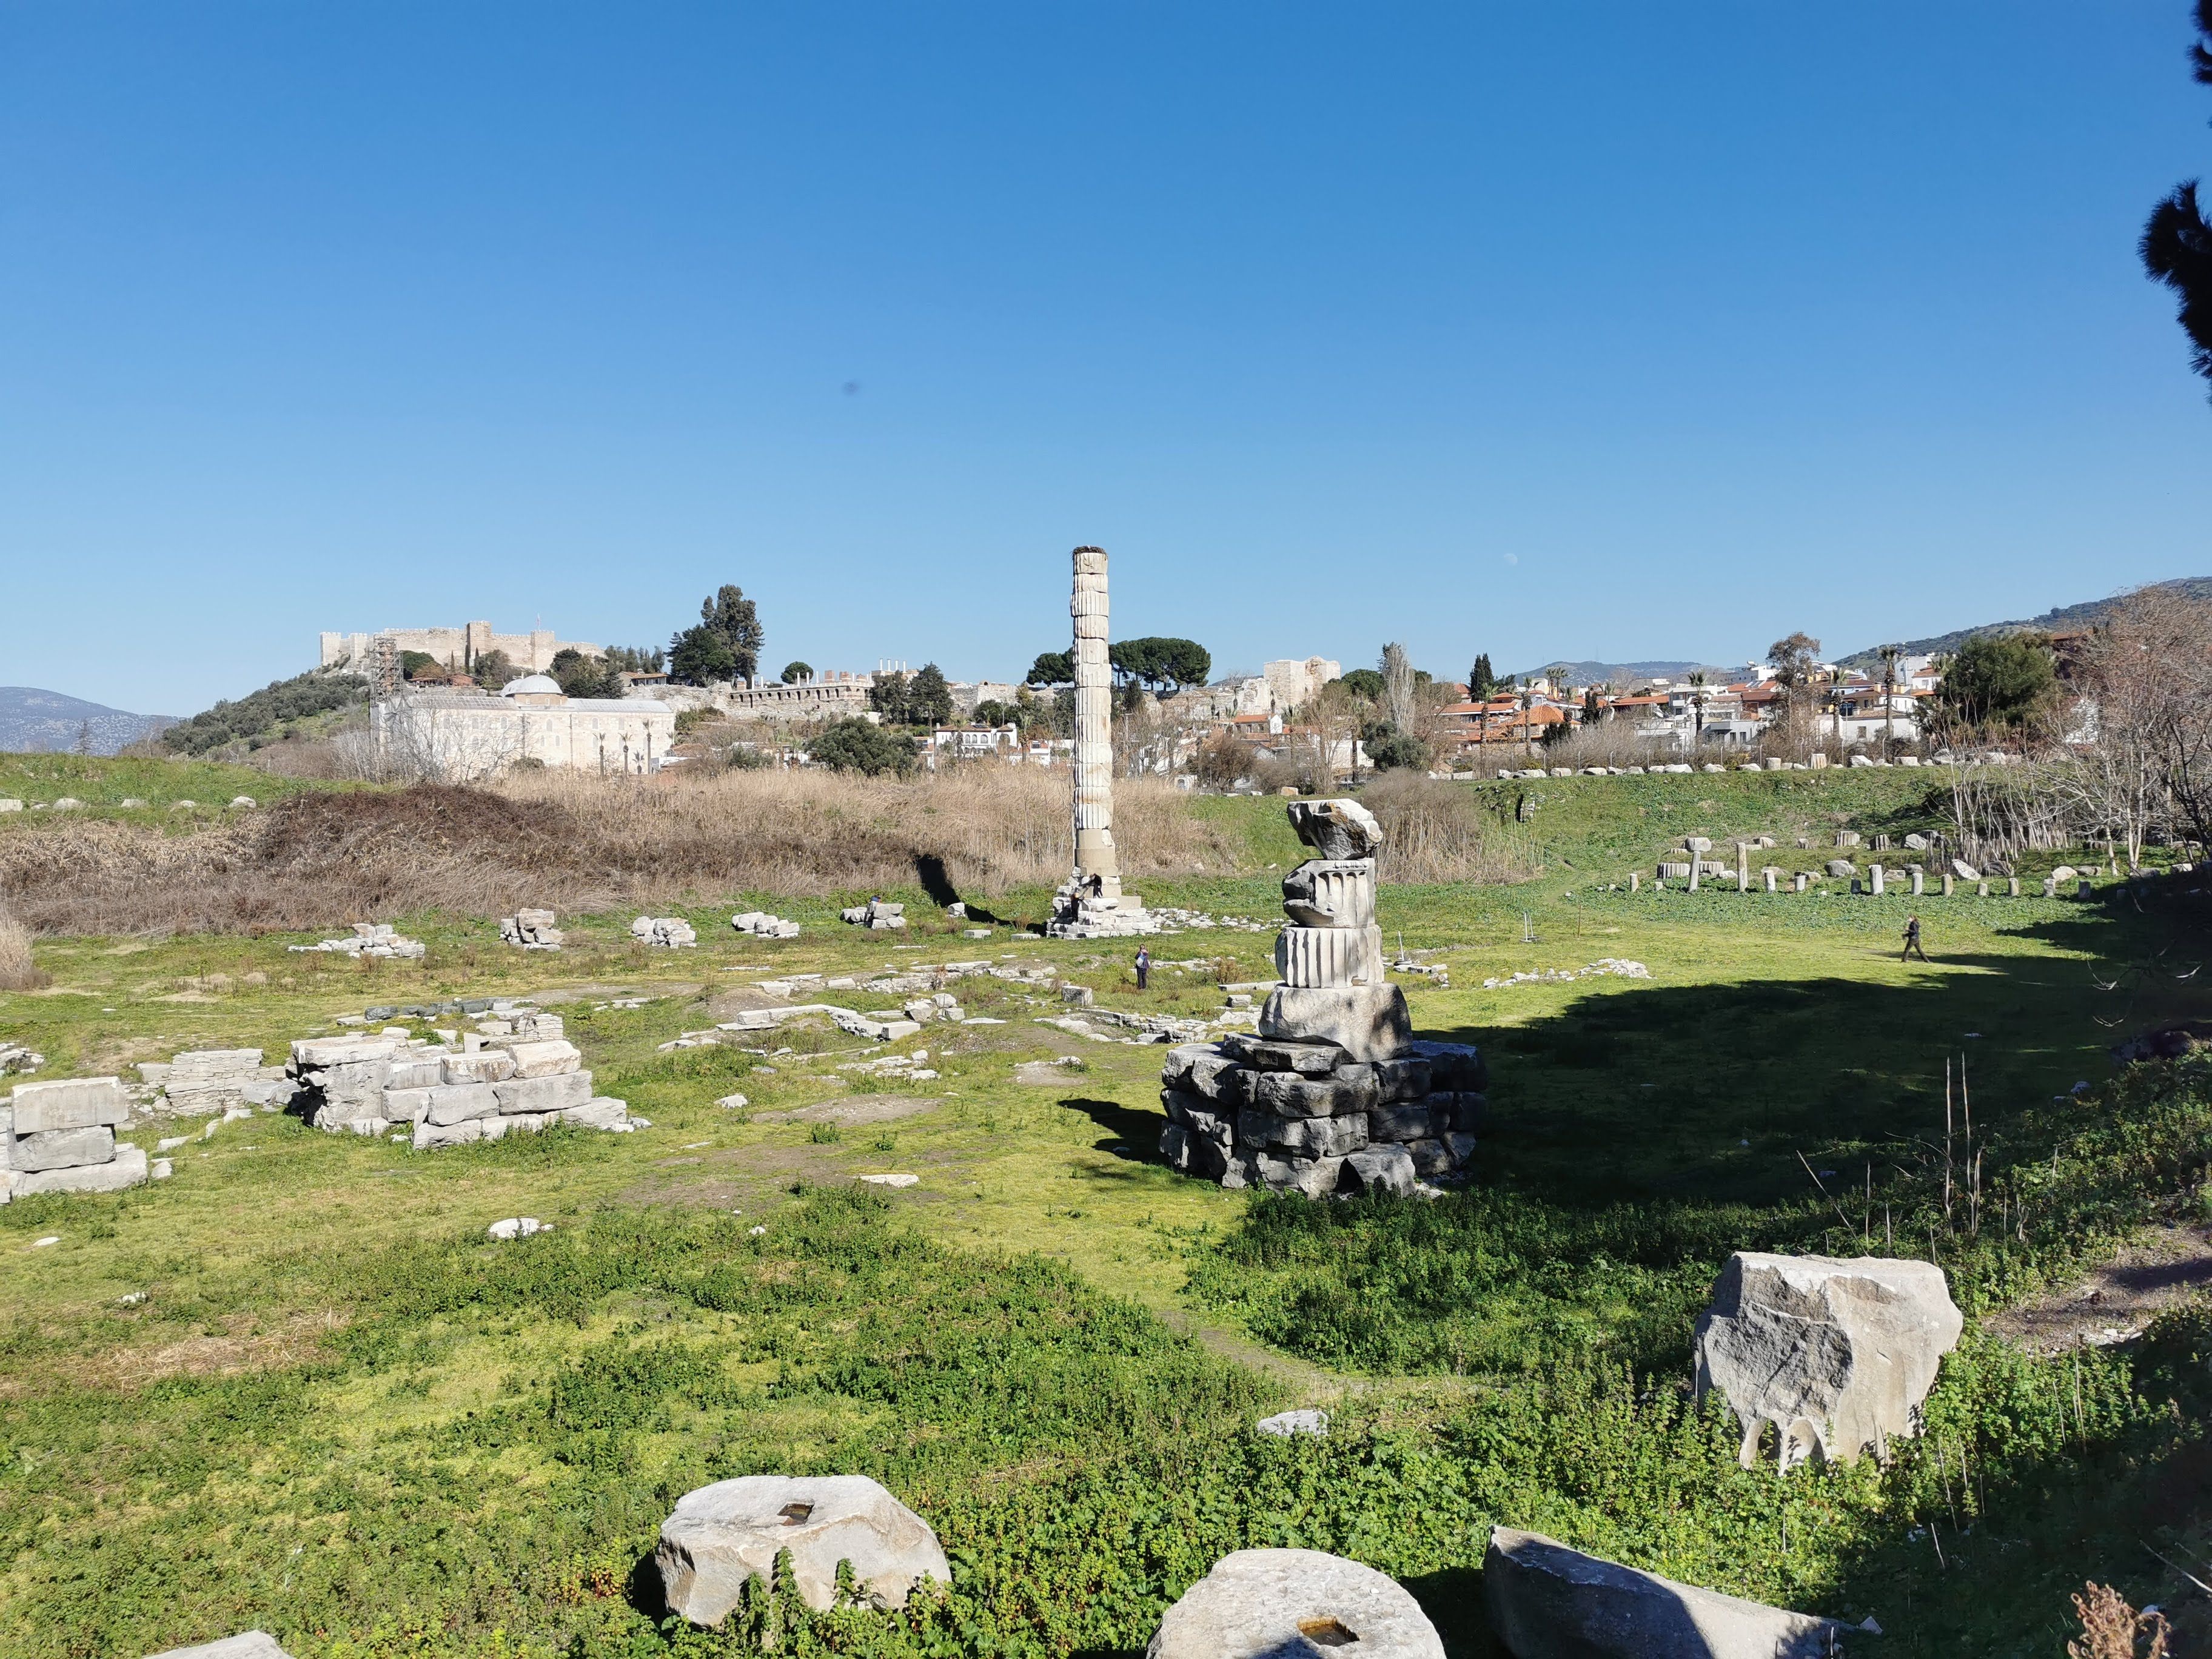 Ruins of the Temple of Artemis